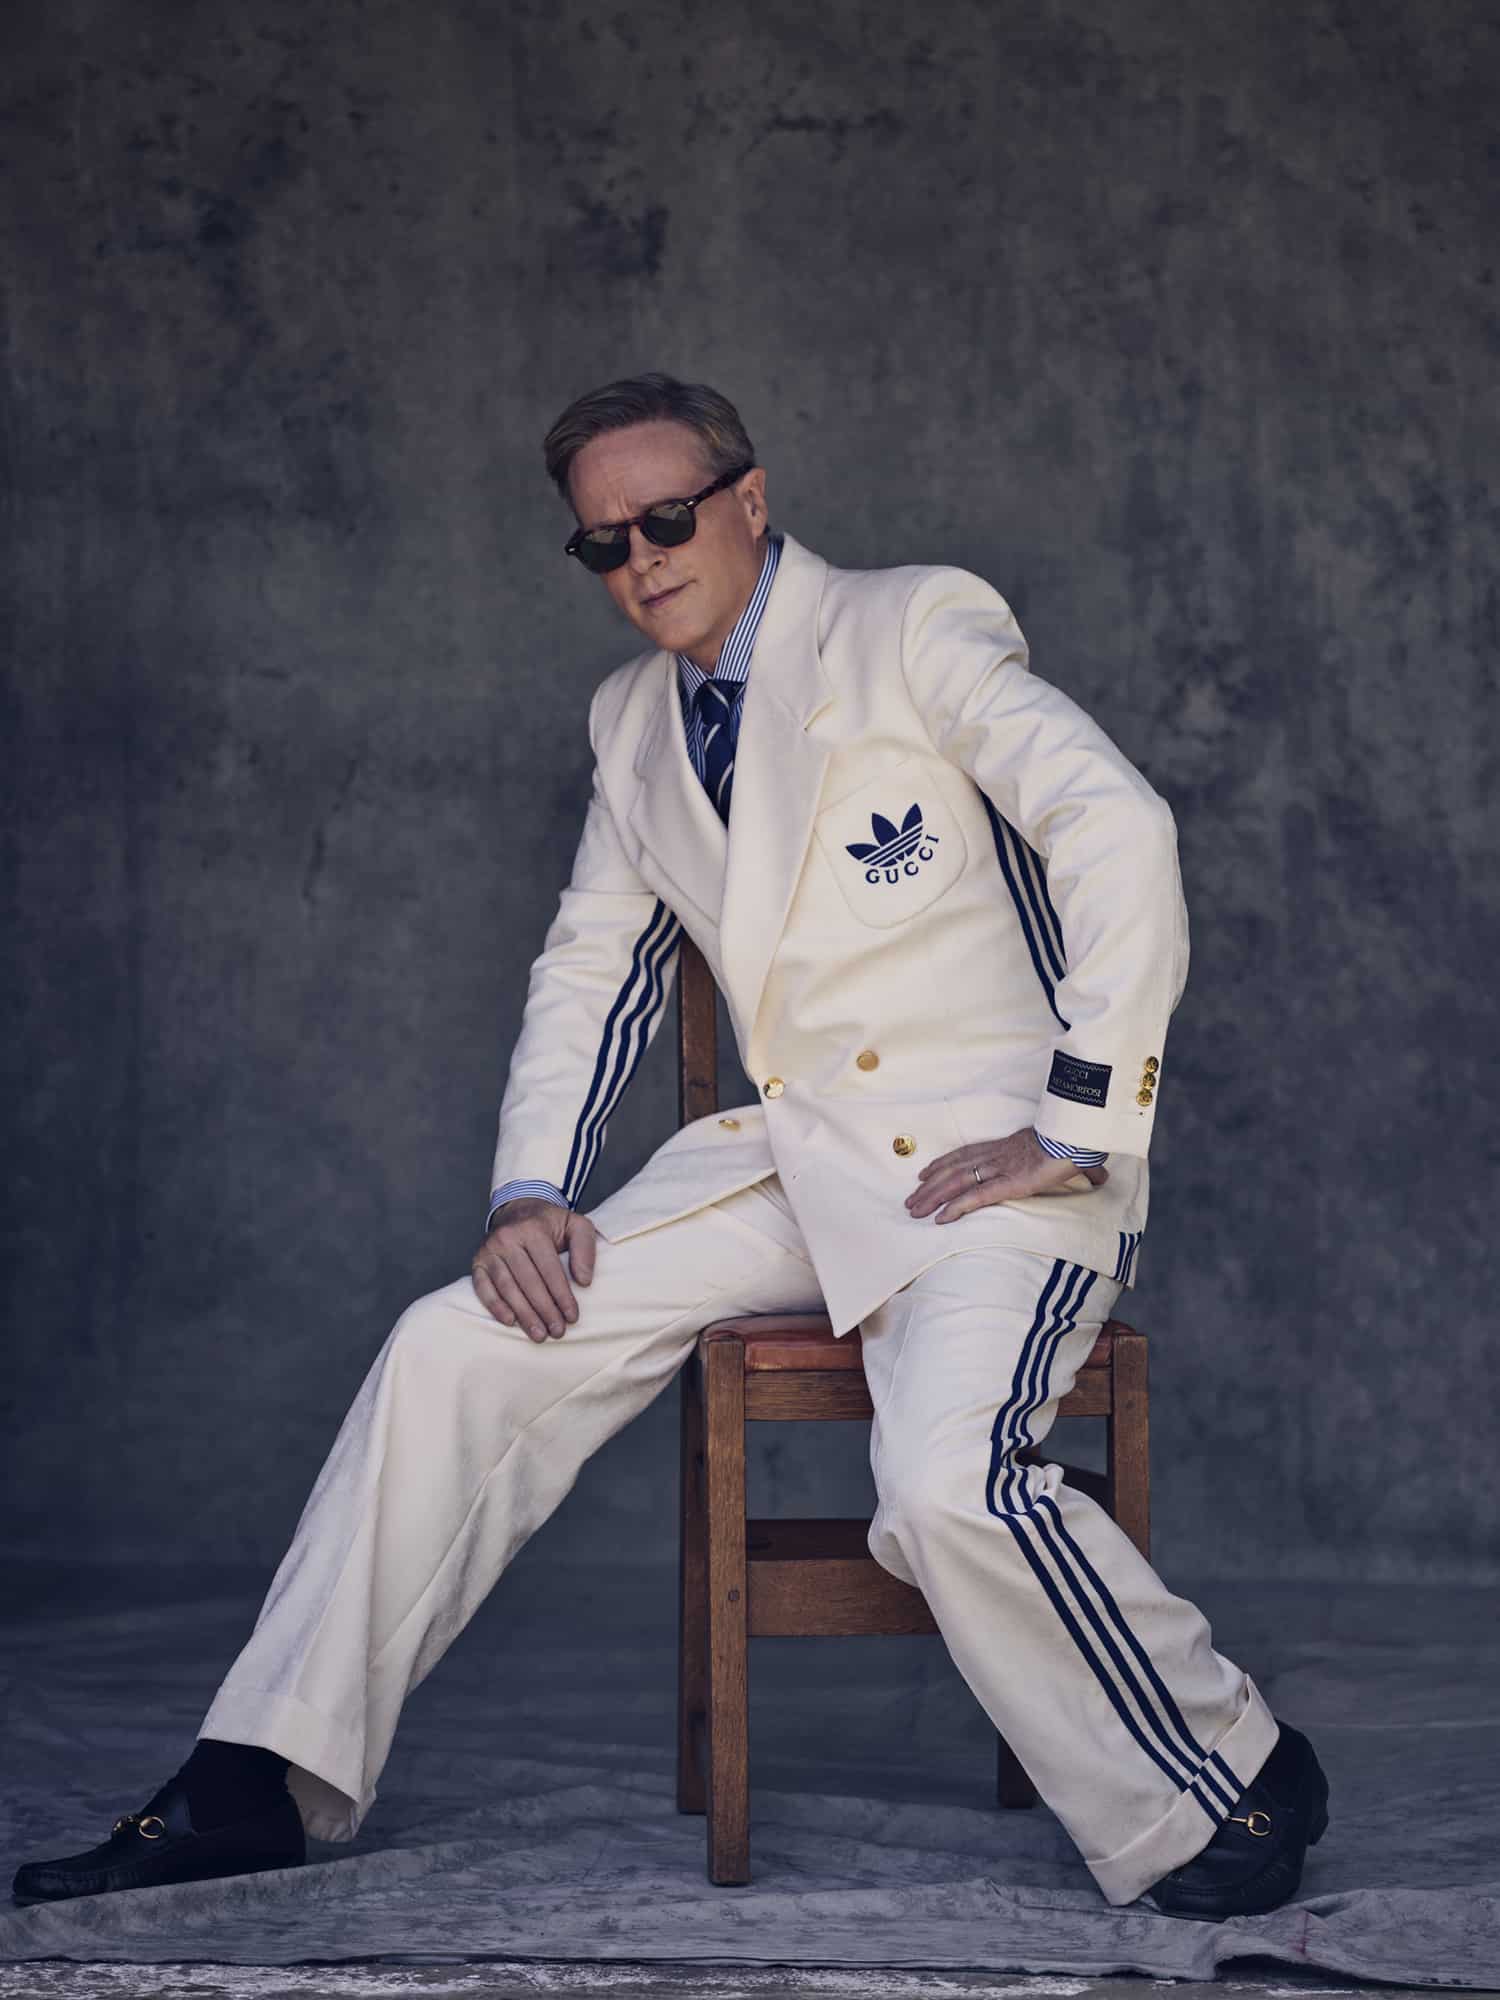 Cary wears ivory monogrammedand Adidas stripe suit, black leather loafers, by GUCCI. Striped shirt and tie by RALPH LAUREN. Sunglasses by JACQUES MARIE MAGE. // 📸 : Kurt Iswarienko